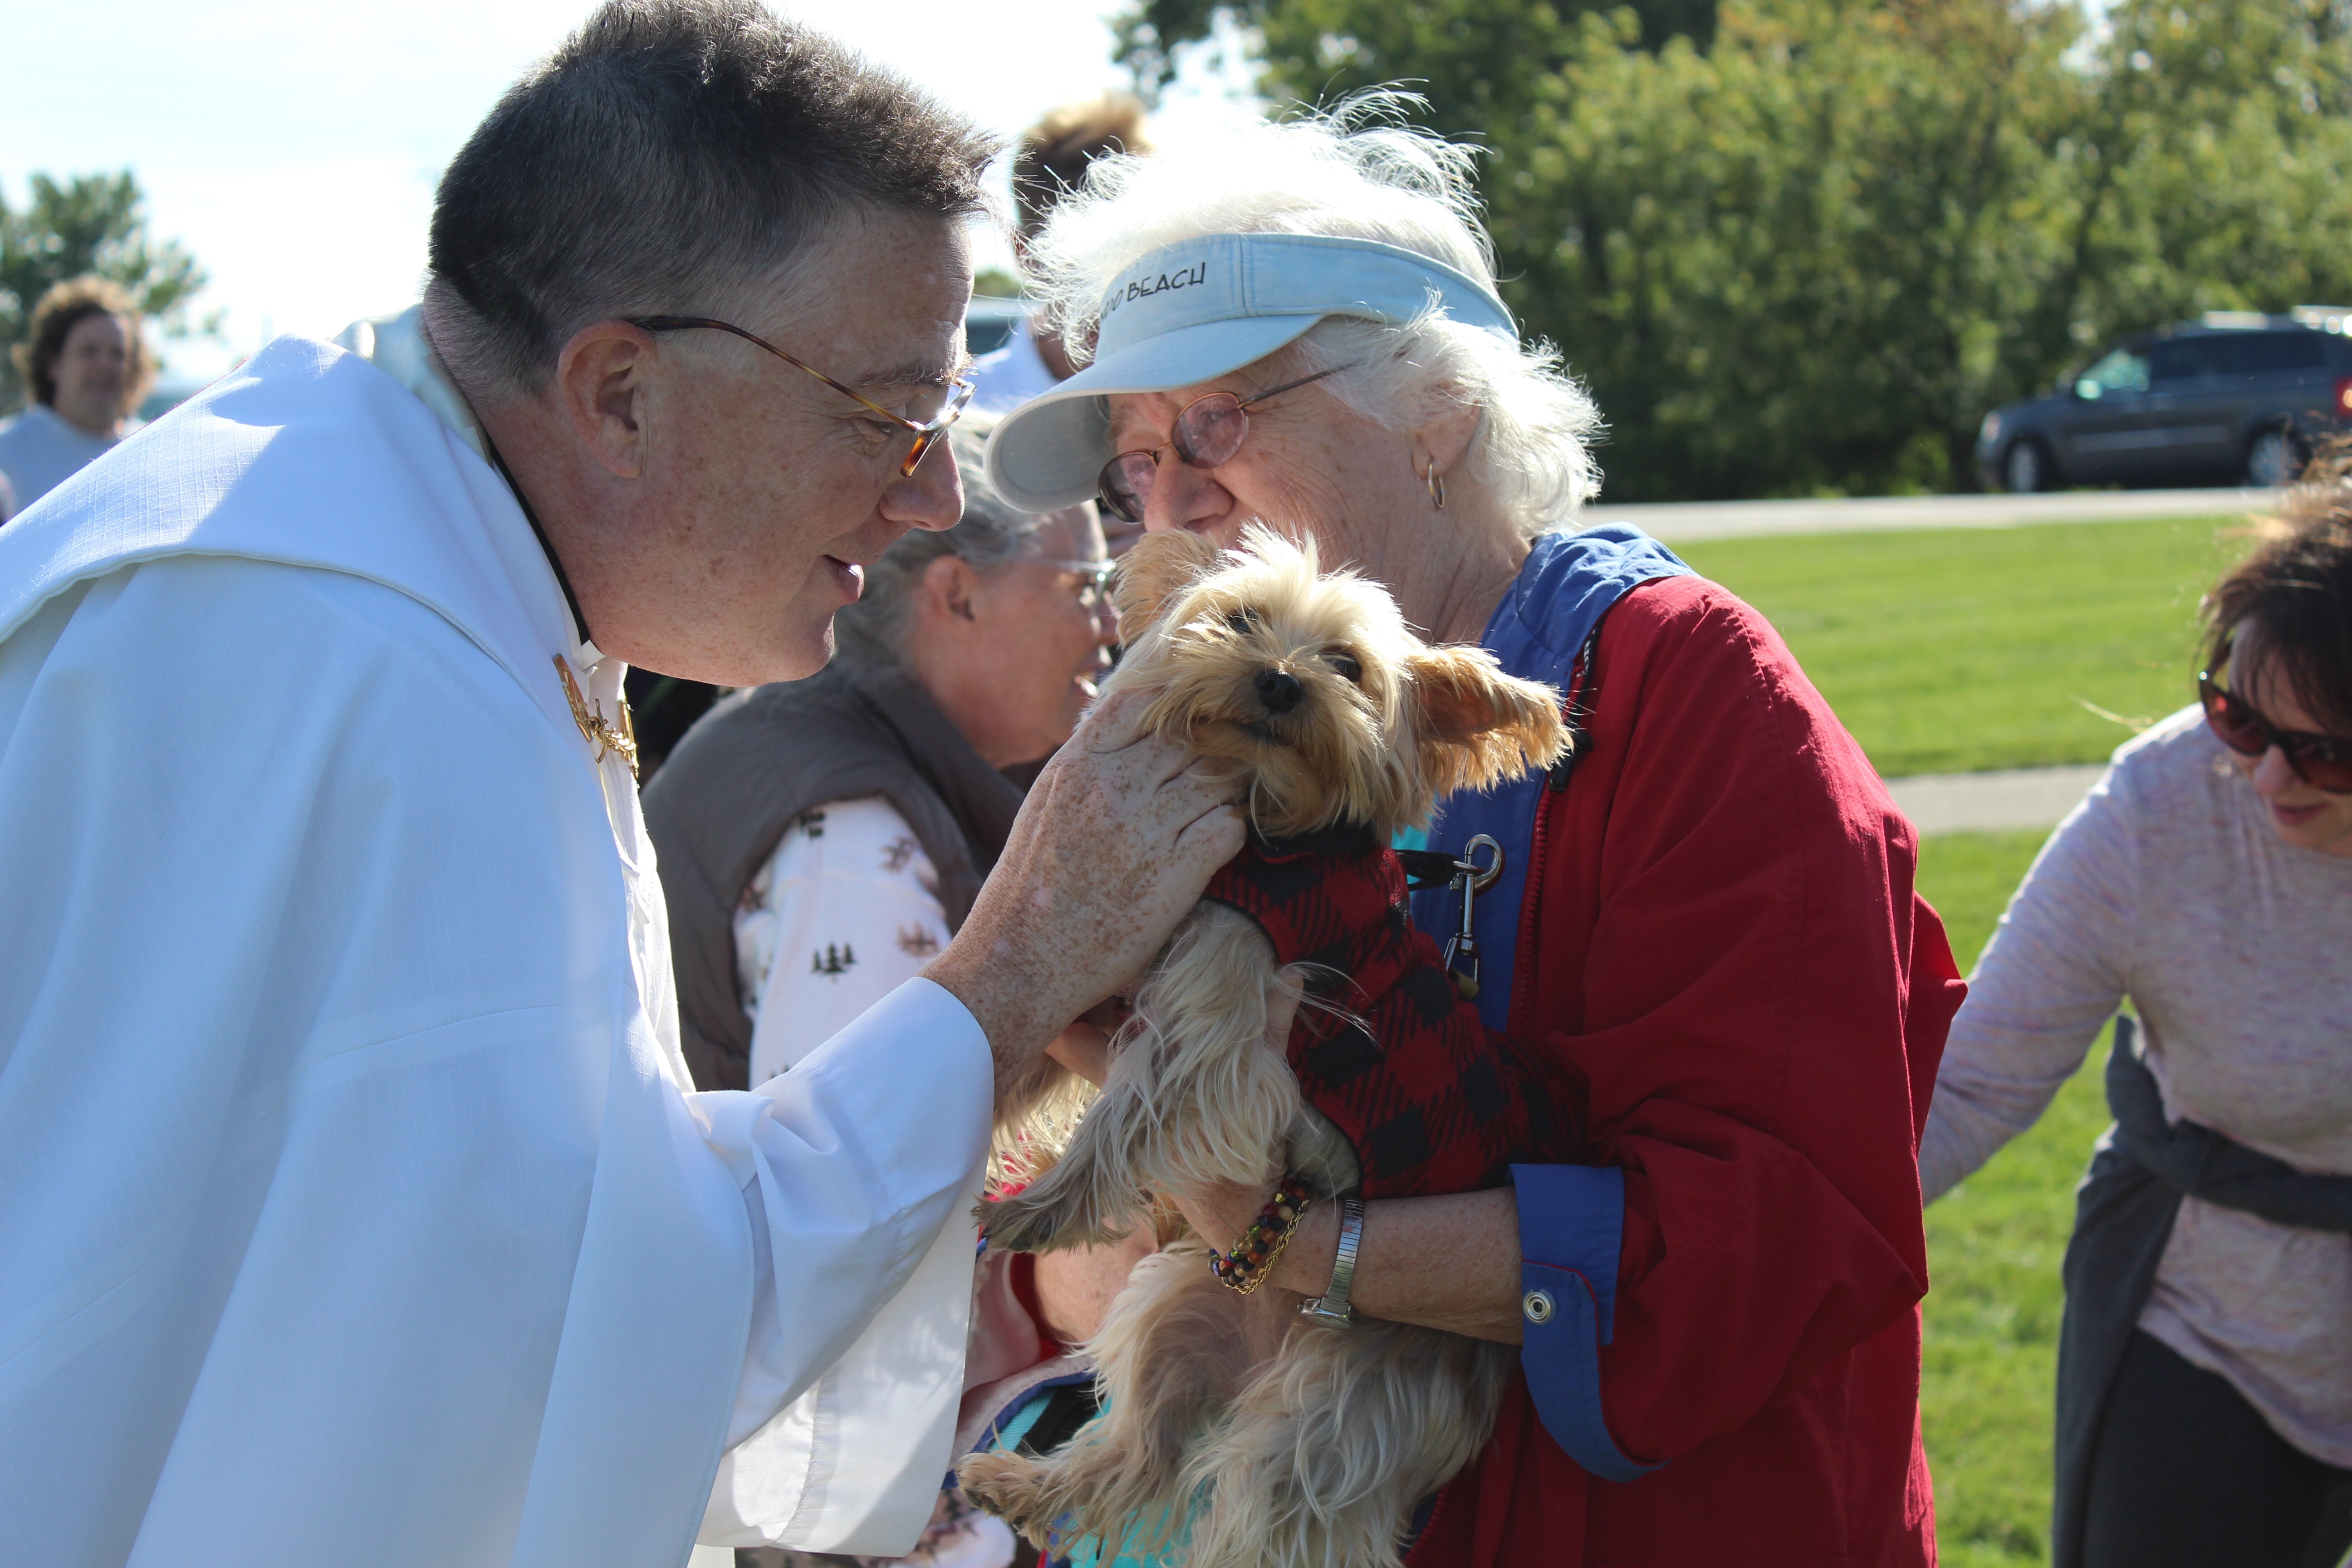 St. Joseph Church blesses all creatures, great and small